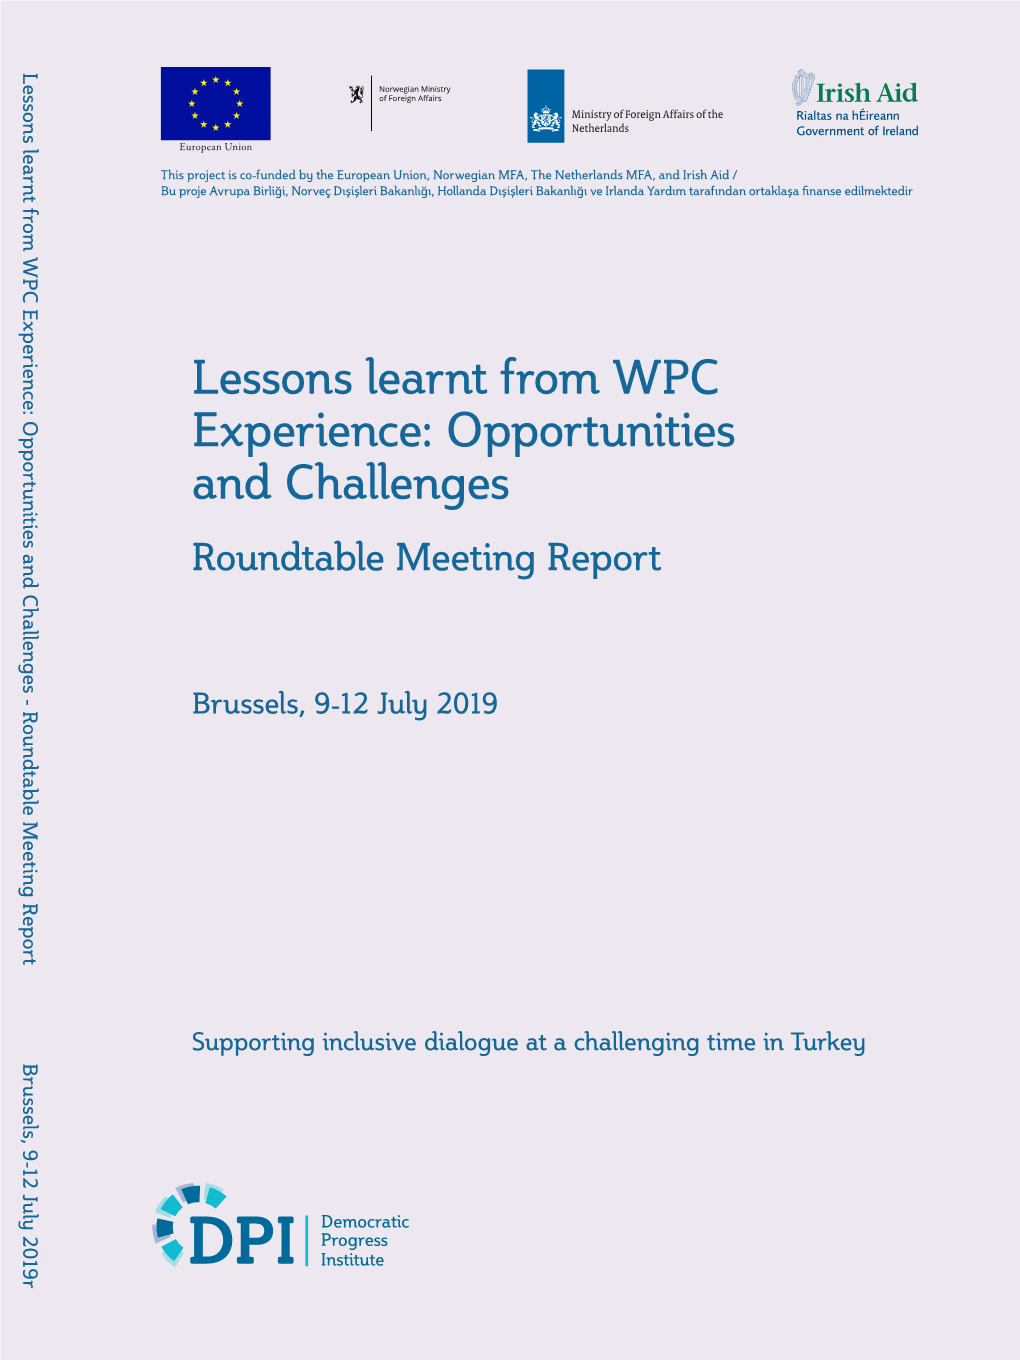 Lessons Learnt from WPC Experience